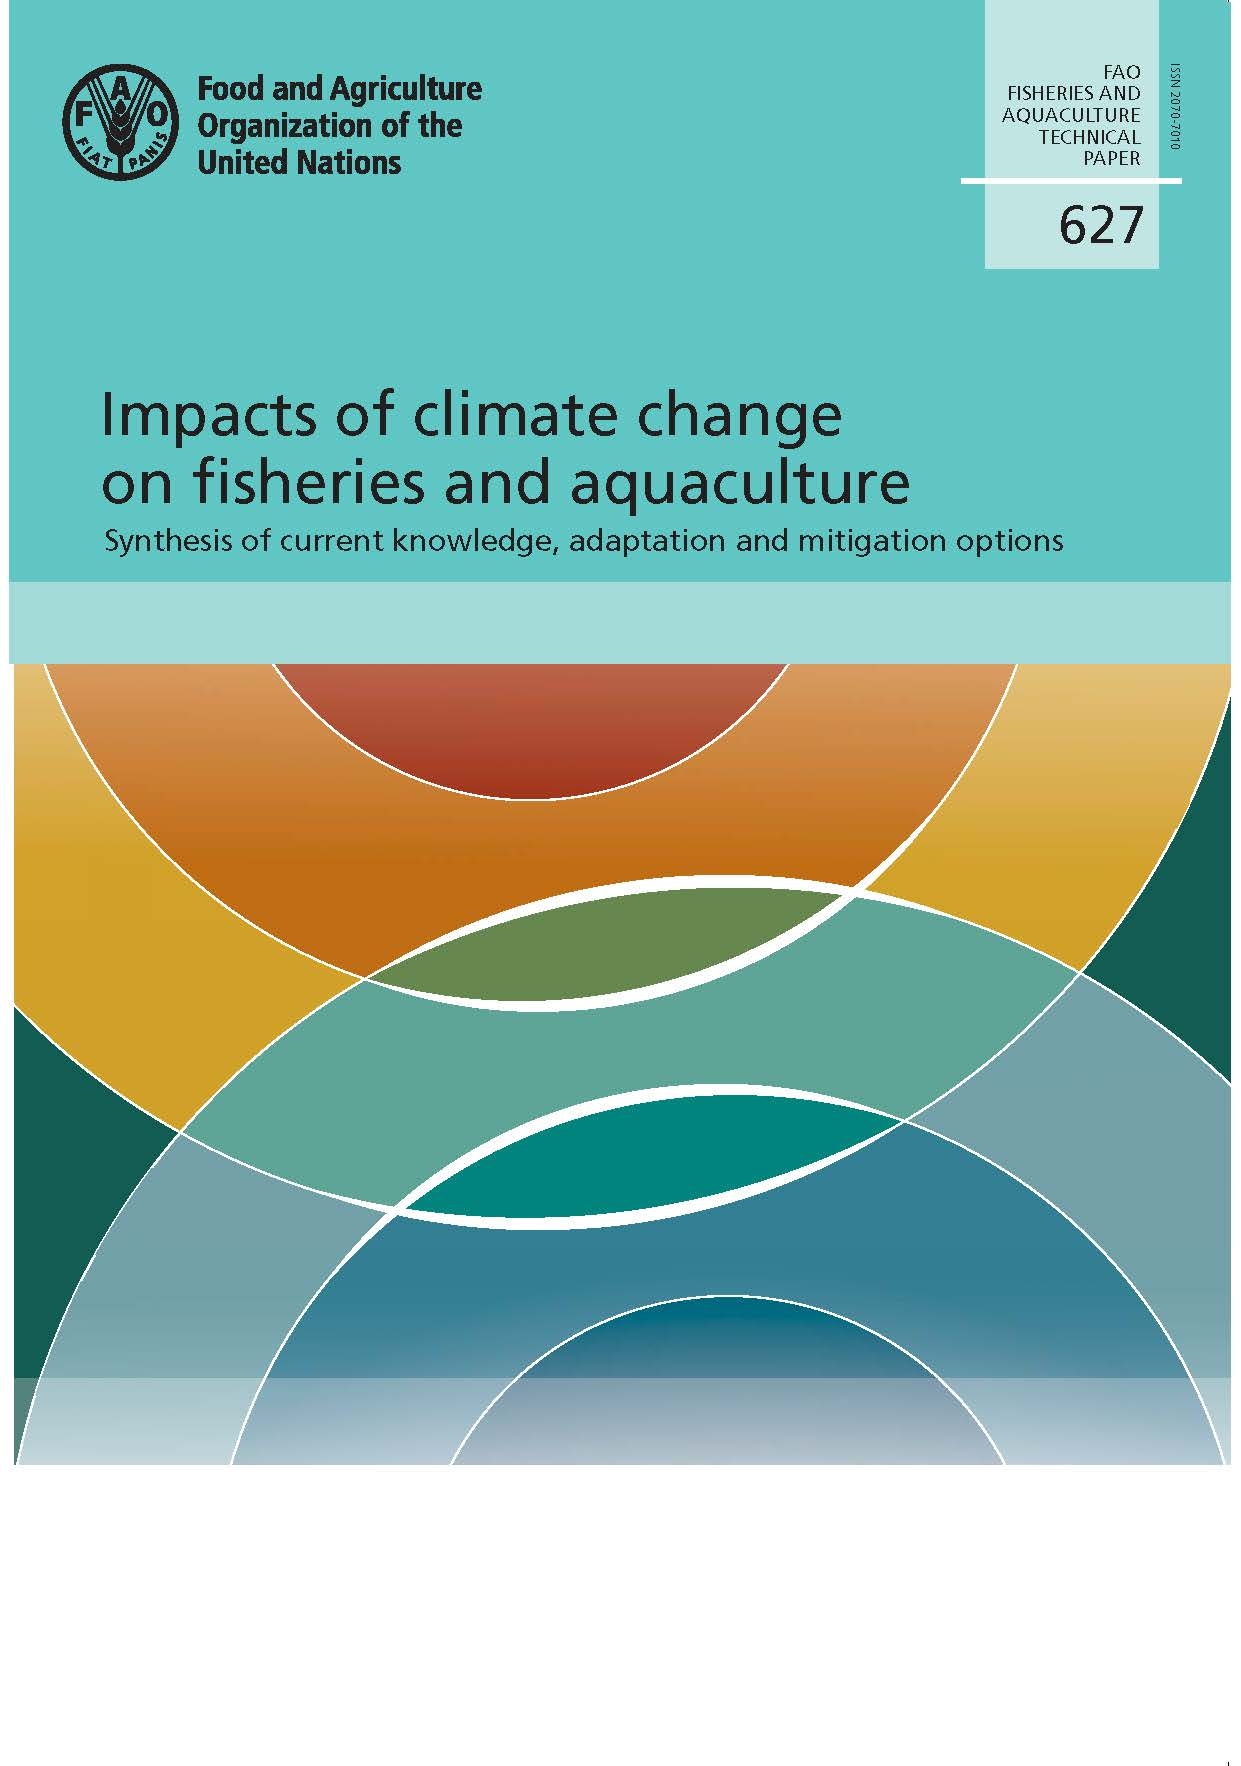 Impacts of climate change on fisheries and aquaculture: Synthesis of current knowledge, adaptation and mitigation options